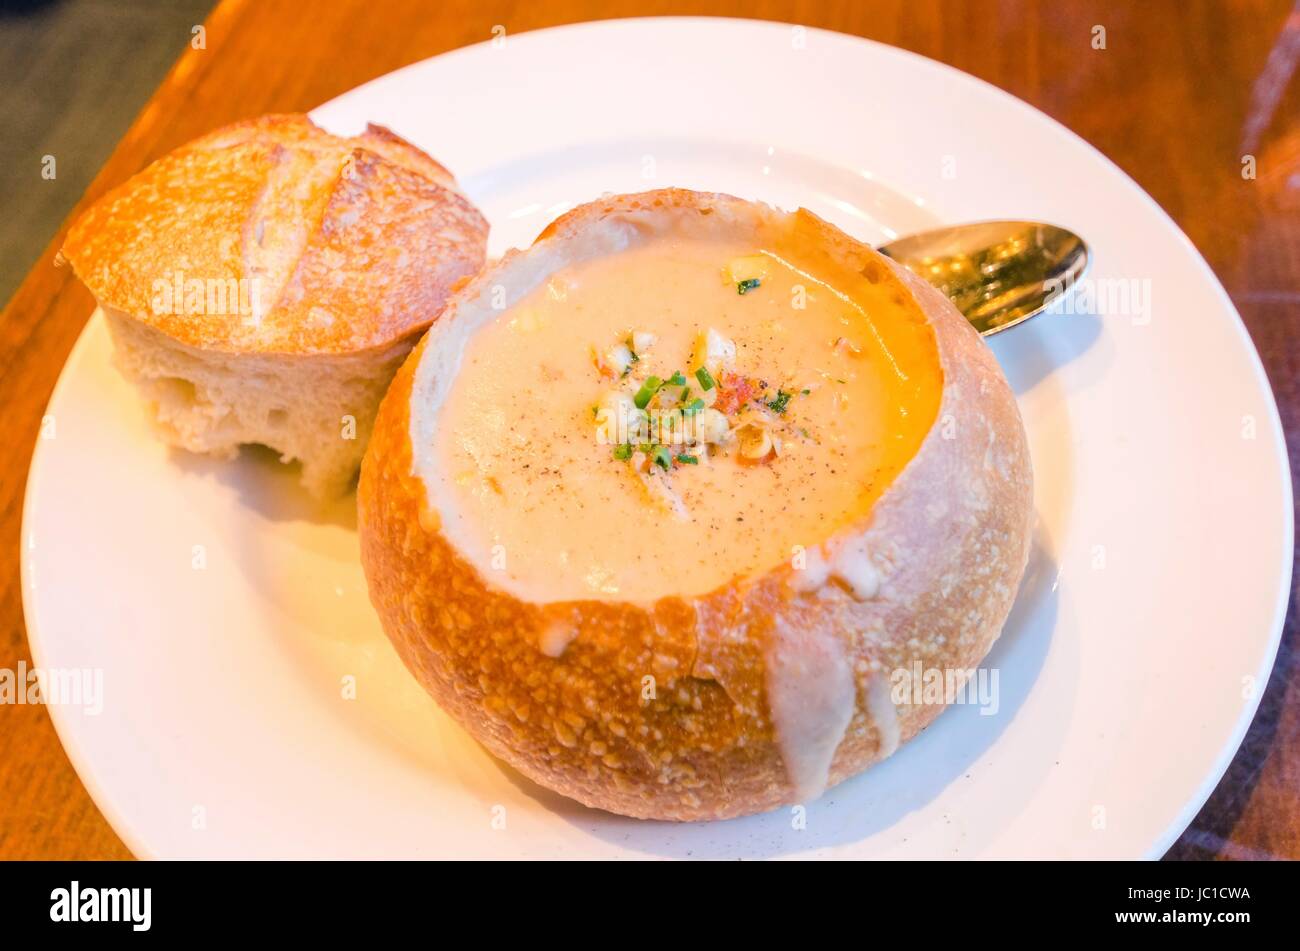 Close up of a Sourdough Clam Chowder gourmet dish. A creamy soup made of clams and vegetables served in a loaf of bread by removing the top, a delicious meal in the Fisherman's wharf in San Francisco. Stock Photo